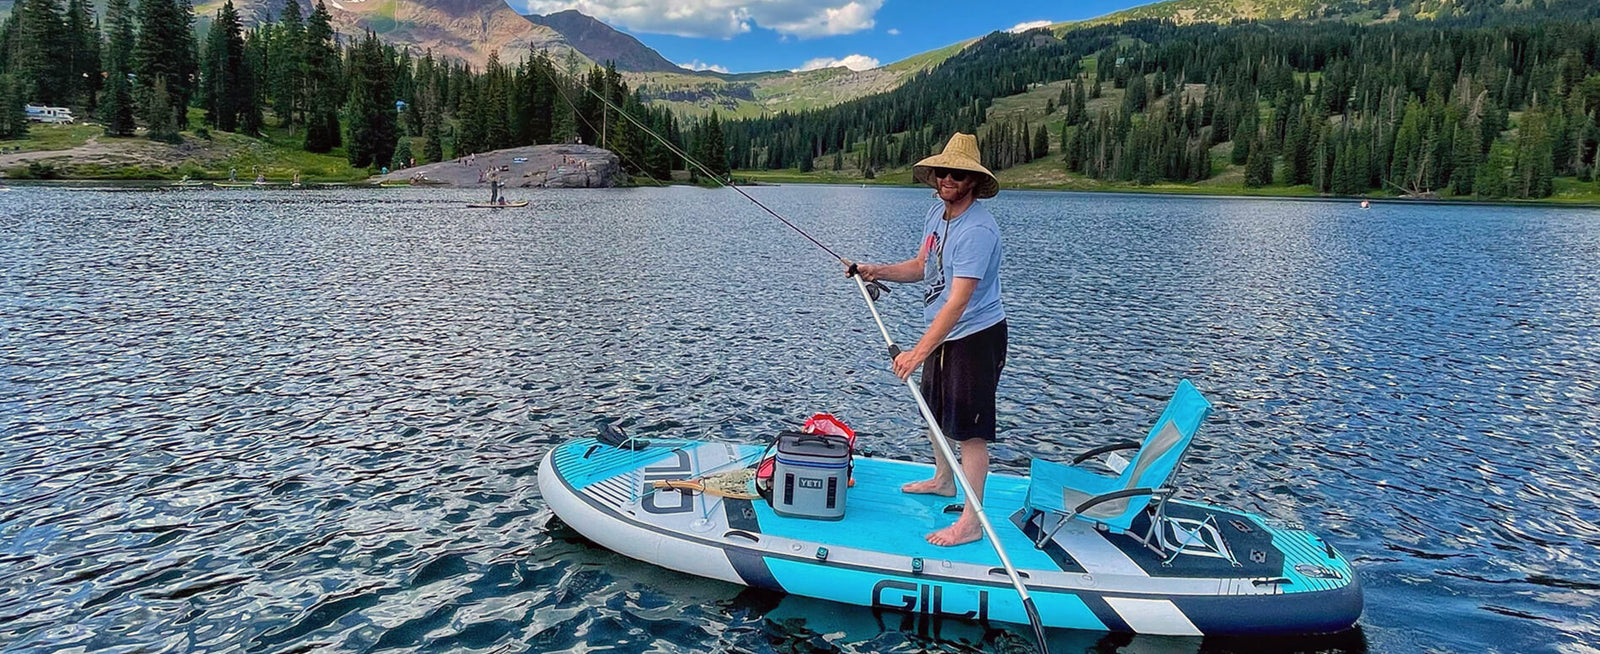 No way you can't mount fishing gear to an inflatable SUP right